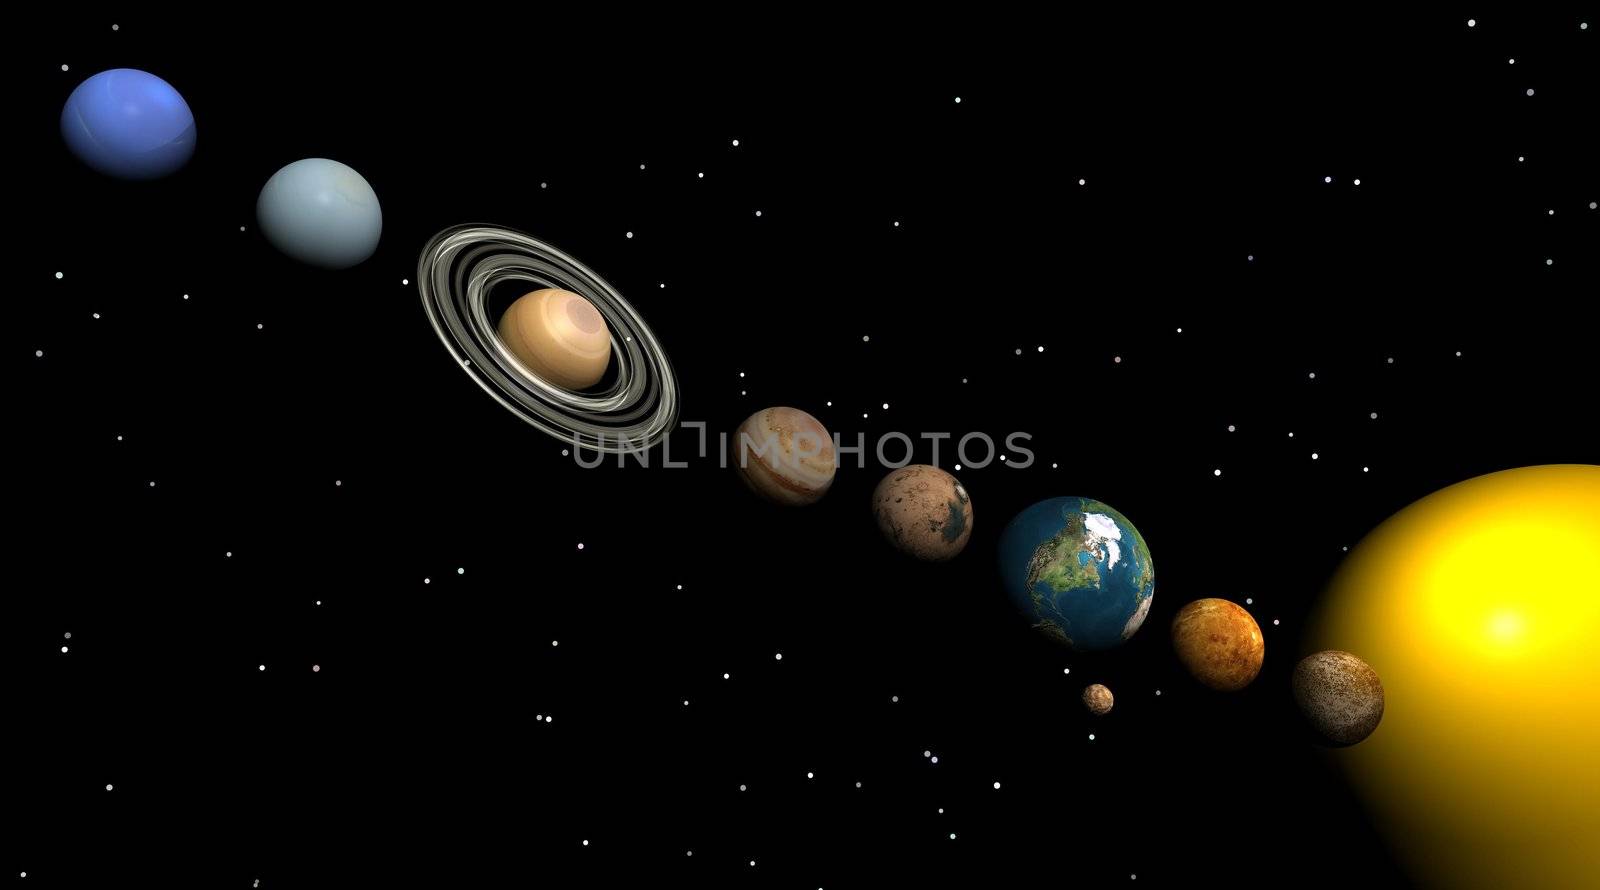 Solar system with all the planets in the night